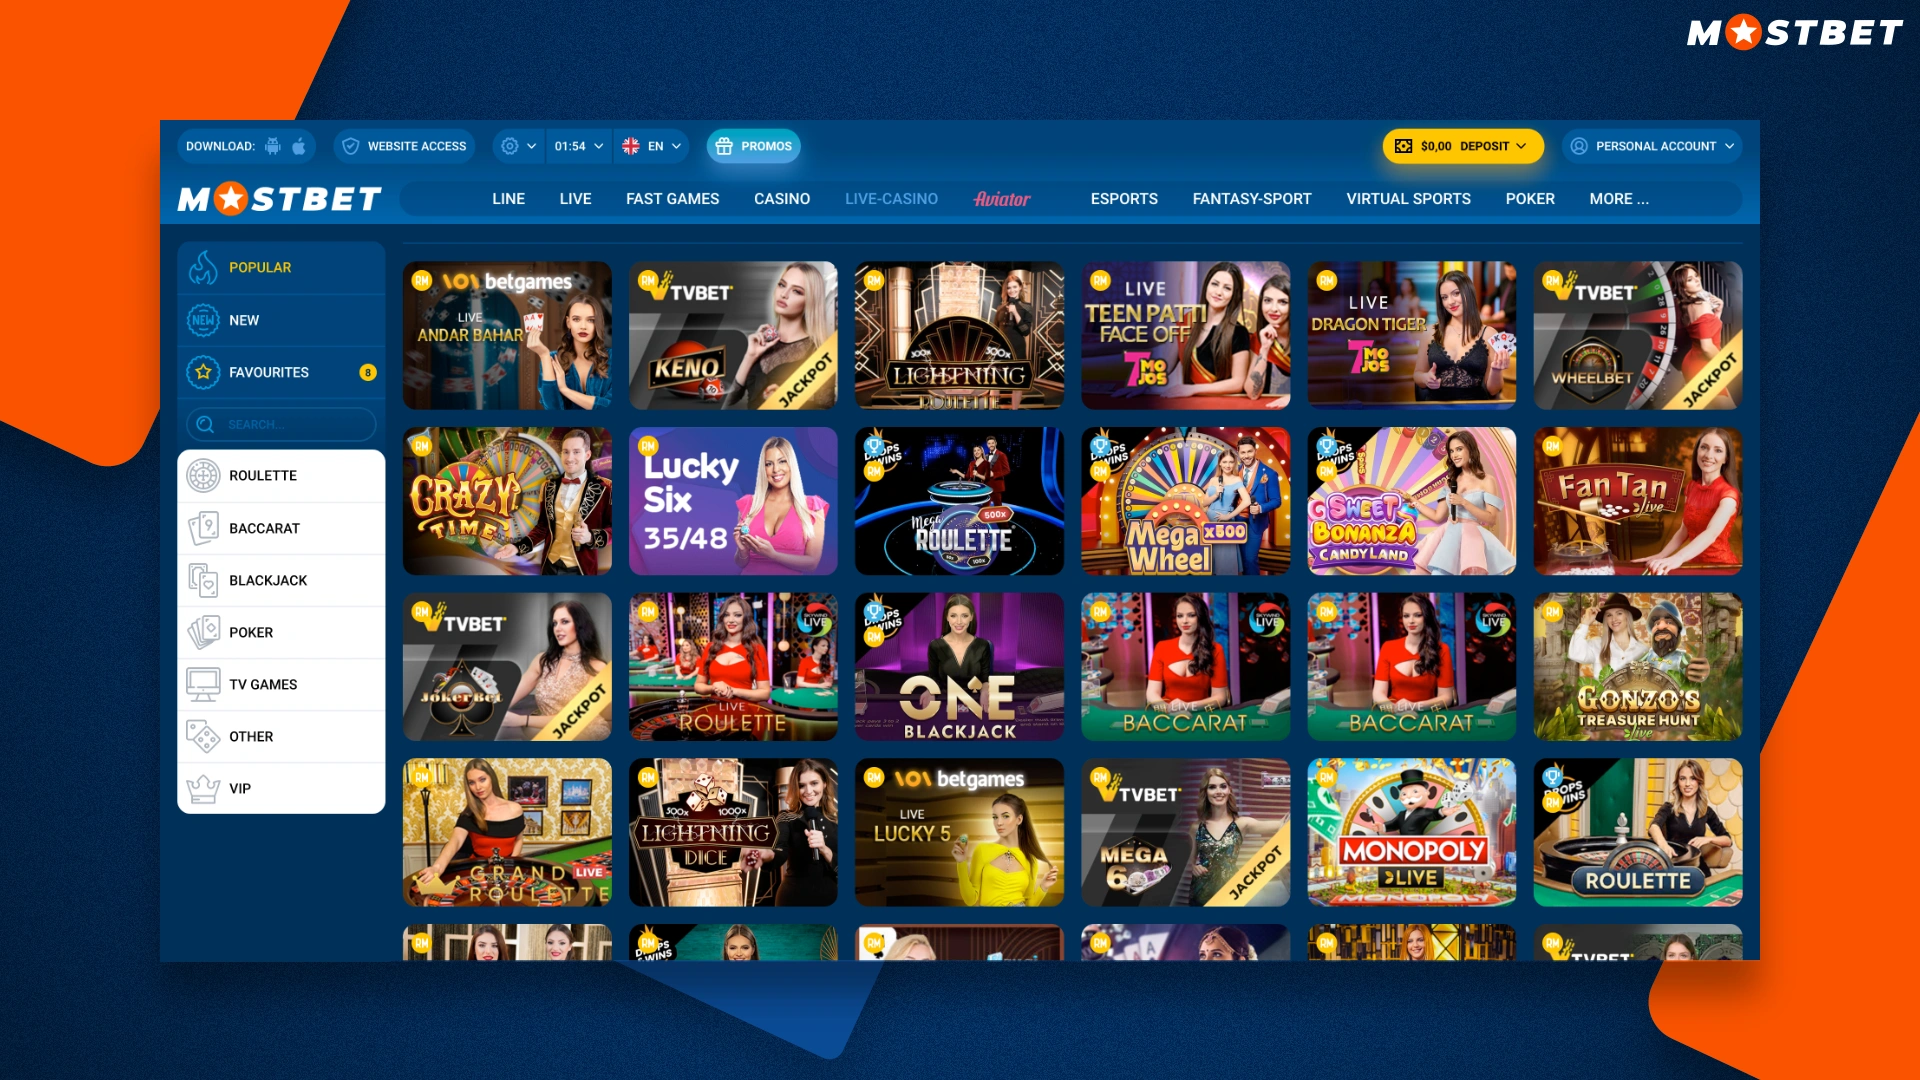 live casino mostbet allows you to play games with real croupiers